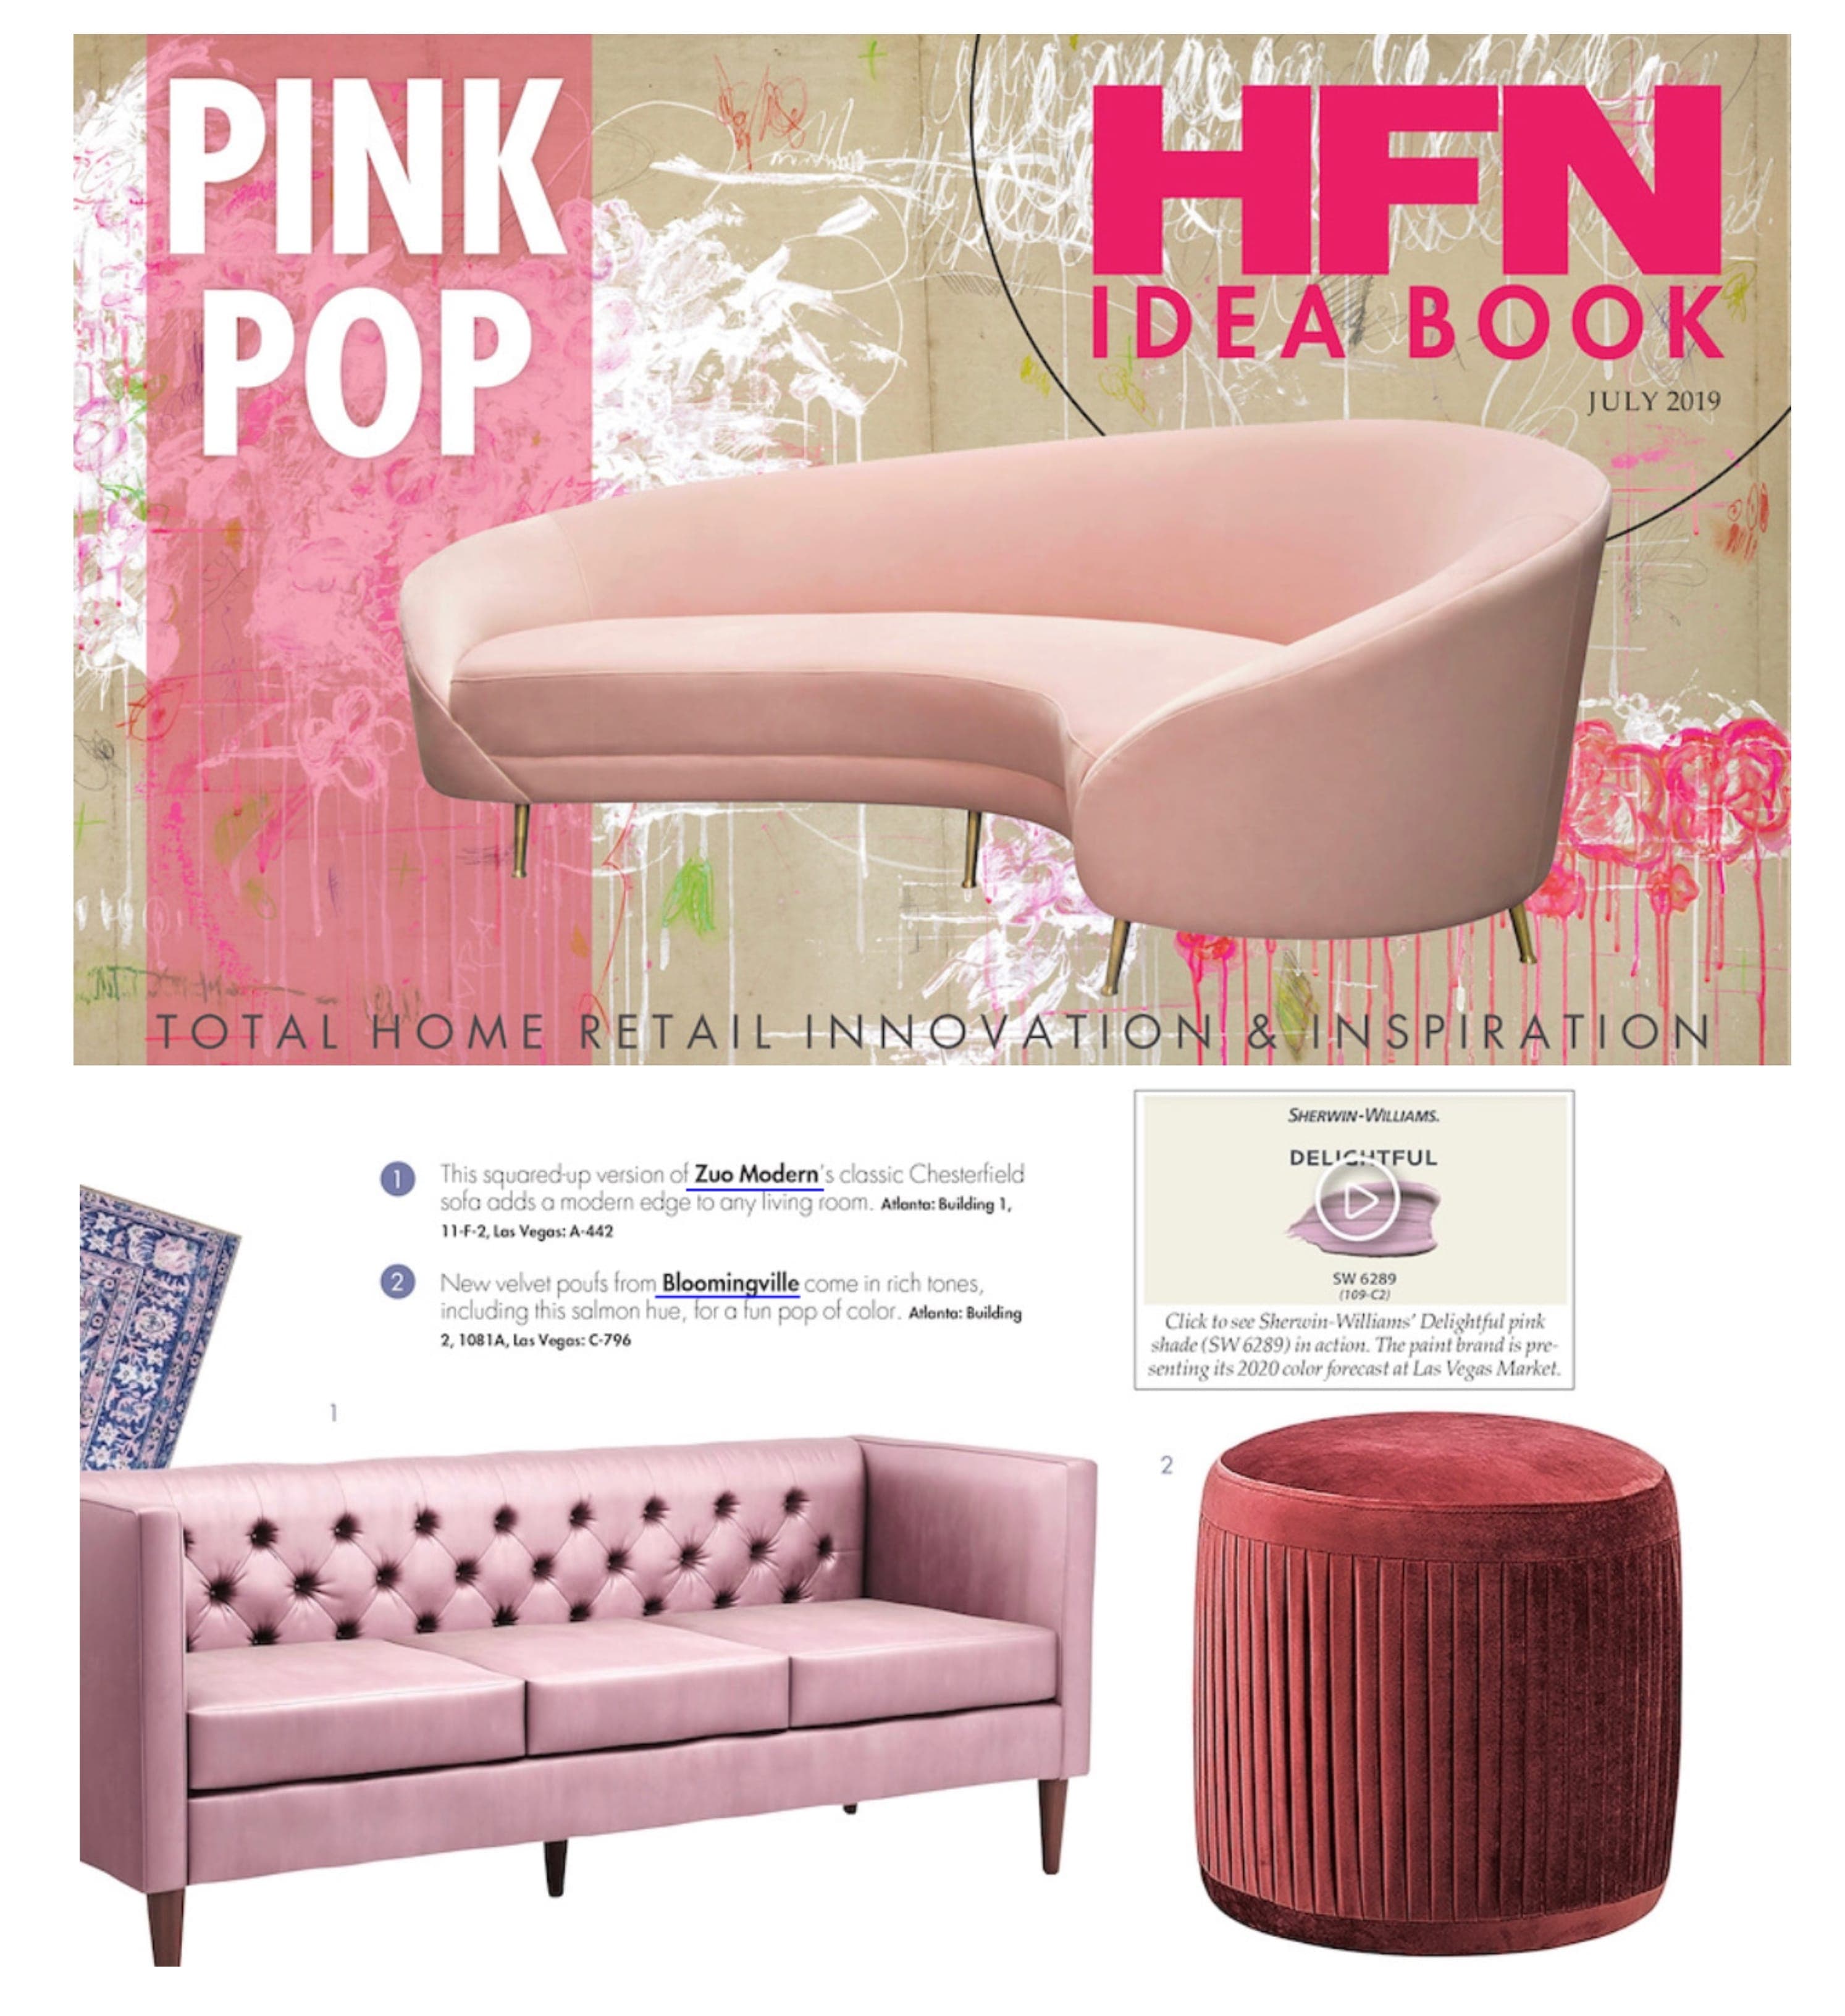 The Zuo Ada pink sofa is featured in the HFN Ideas Book magazine front page